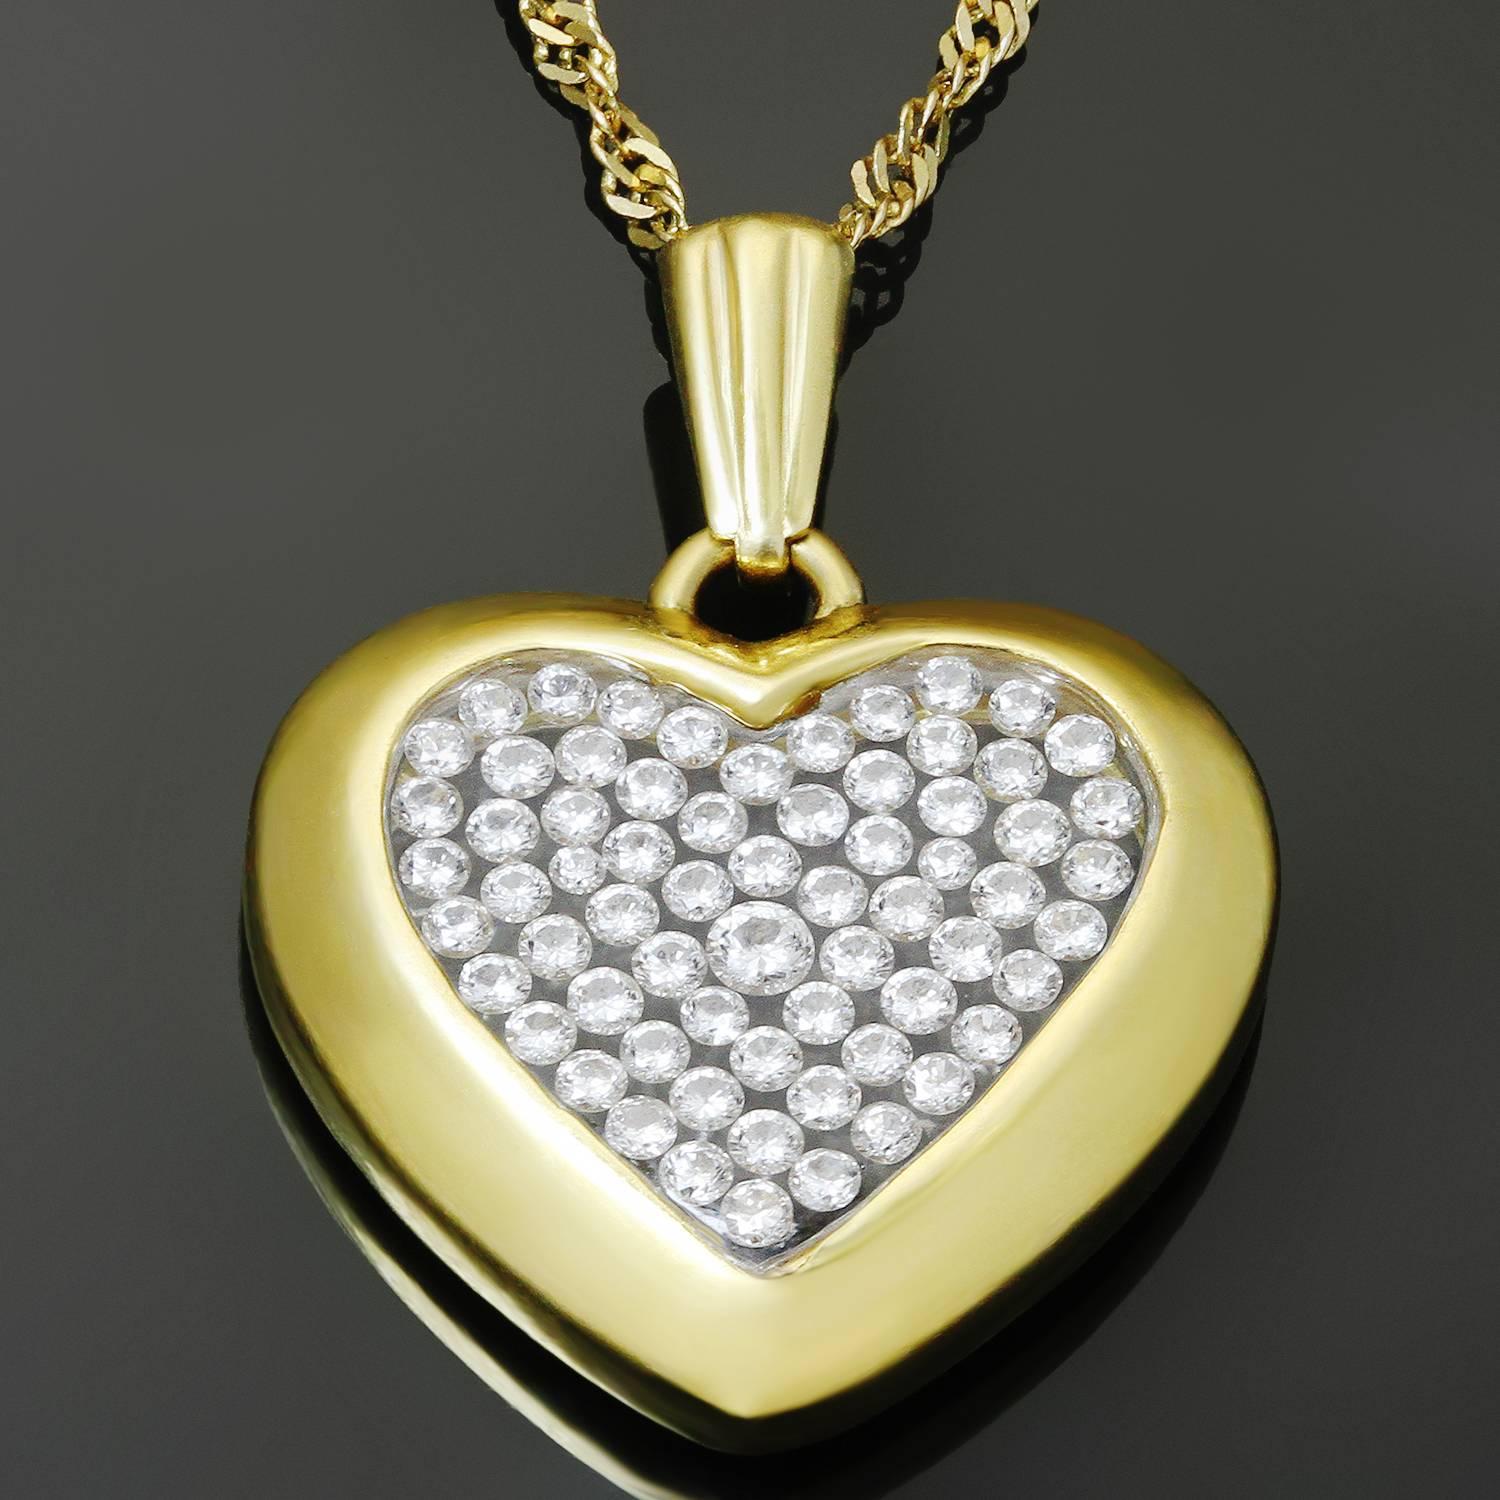 This romantic vintage necklace is crafted in 18k yellow gold and features a heart-shaped pendant accented with brilliant-cut round diamonds of an estimated 0.60 carats set in crystal case. Made in United States circa 1980s.  Measurements: 0.70"